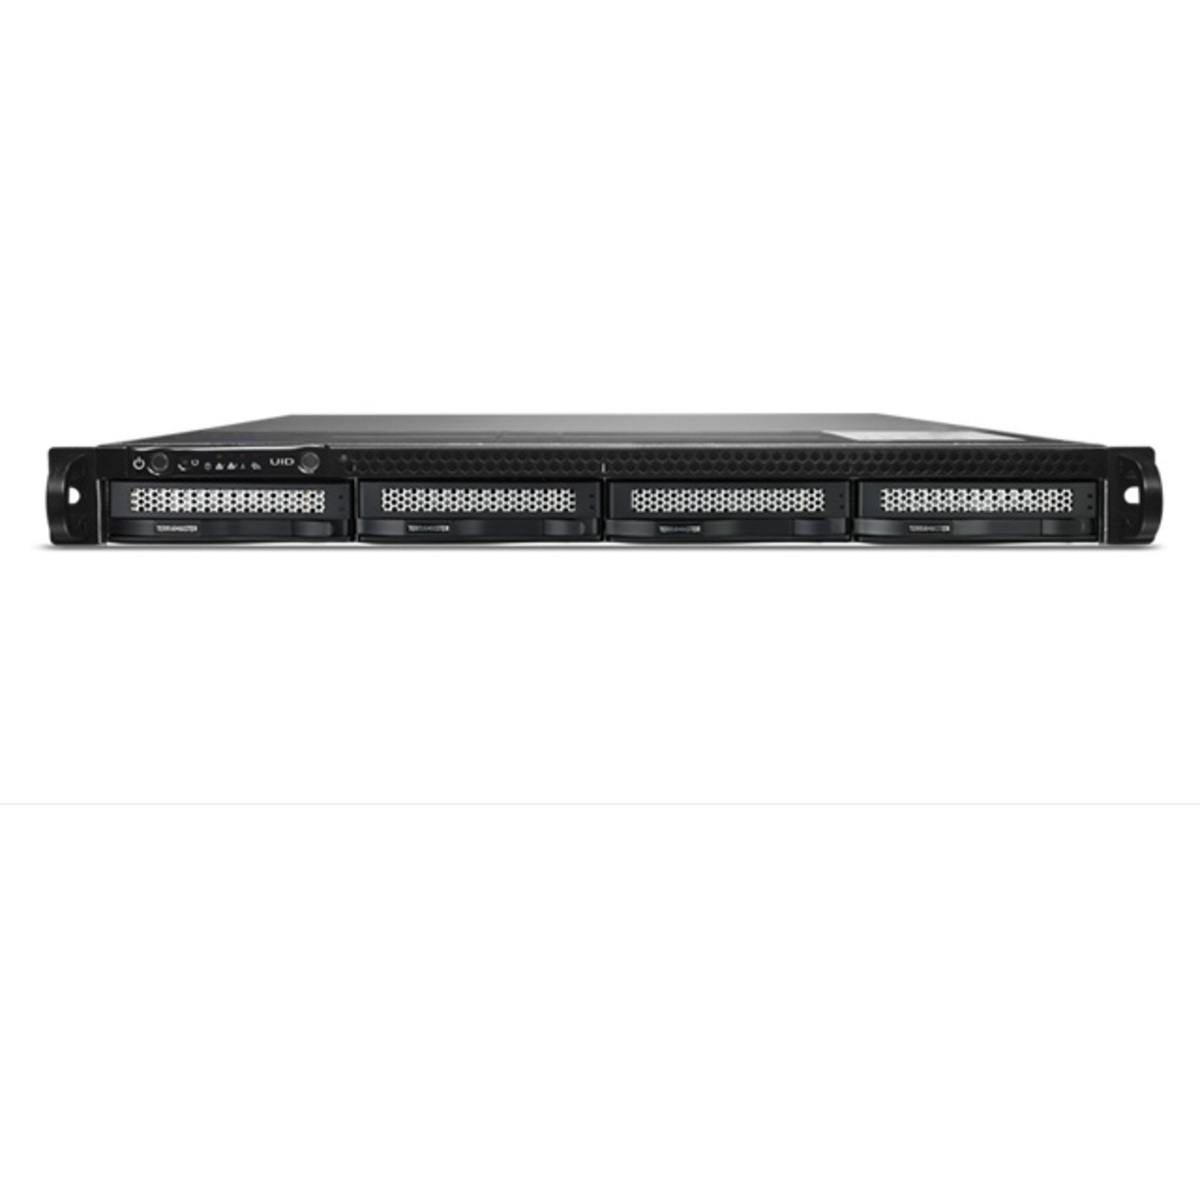 TerraMaster U4-111 16tb 4-Bay RackMount Multimedia / Power User / Business NAS - Network Attached Storage Device 2x8tb Seagate IronWolf Pro ST8000NT001 3.5 7200rpm SATA 6Gb/s HDD NAS Class Drives Installed - Burn-In Tested - ON SALE U4-111